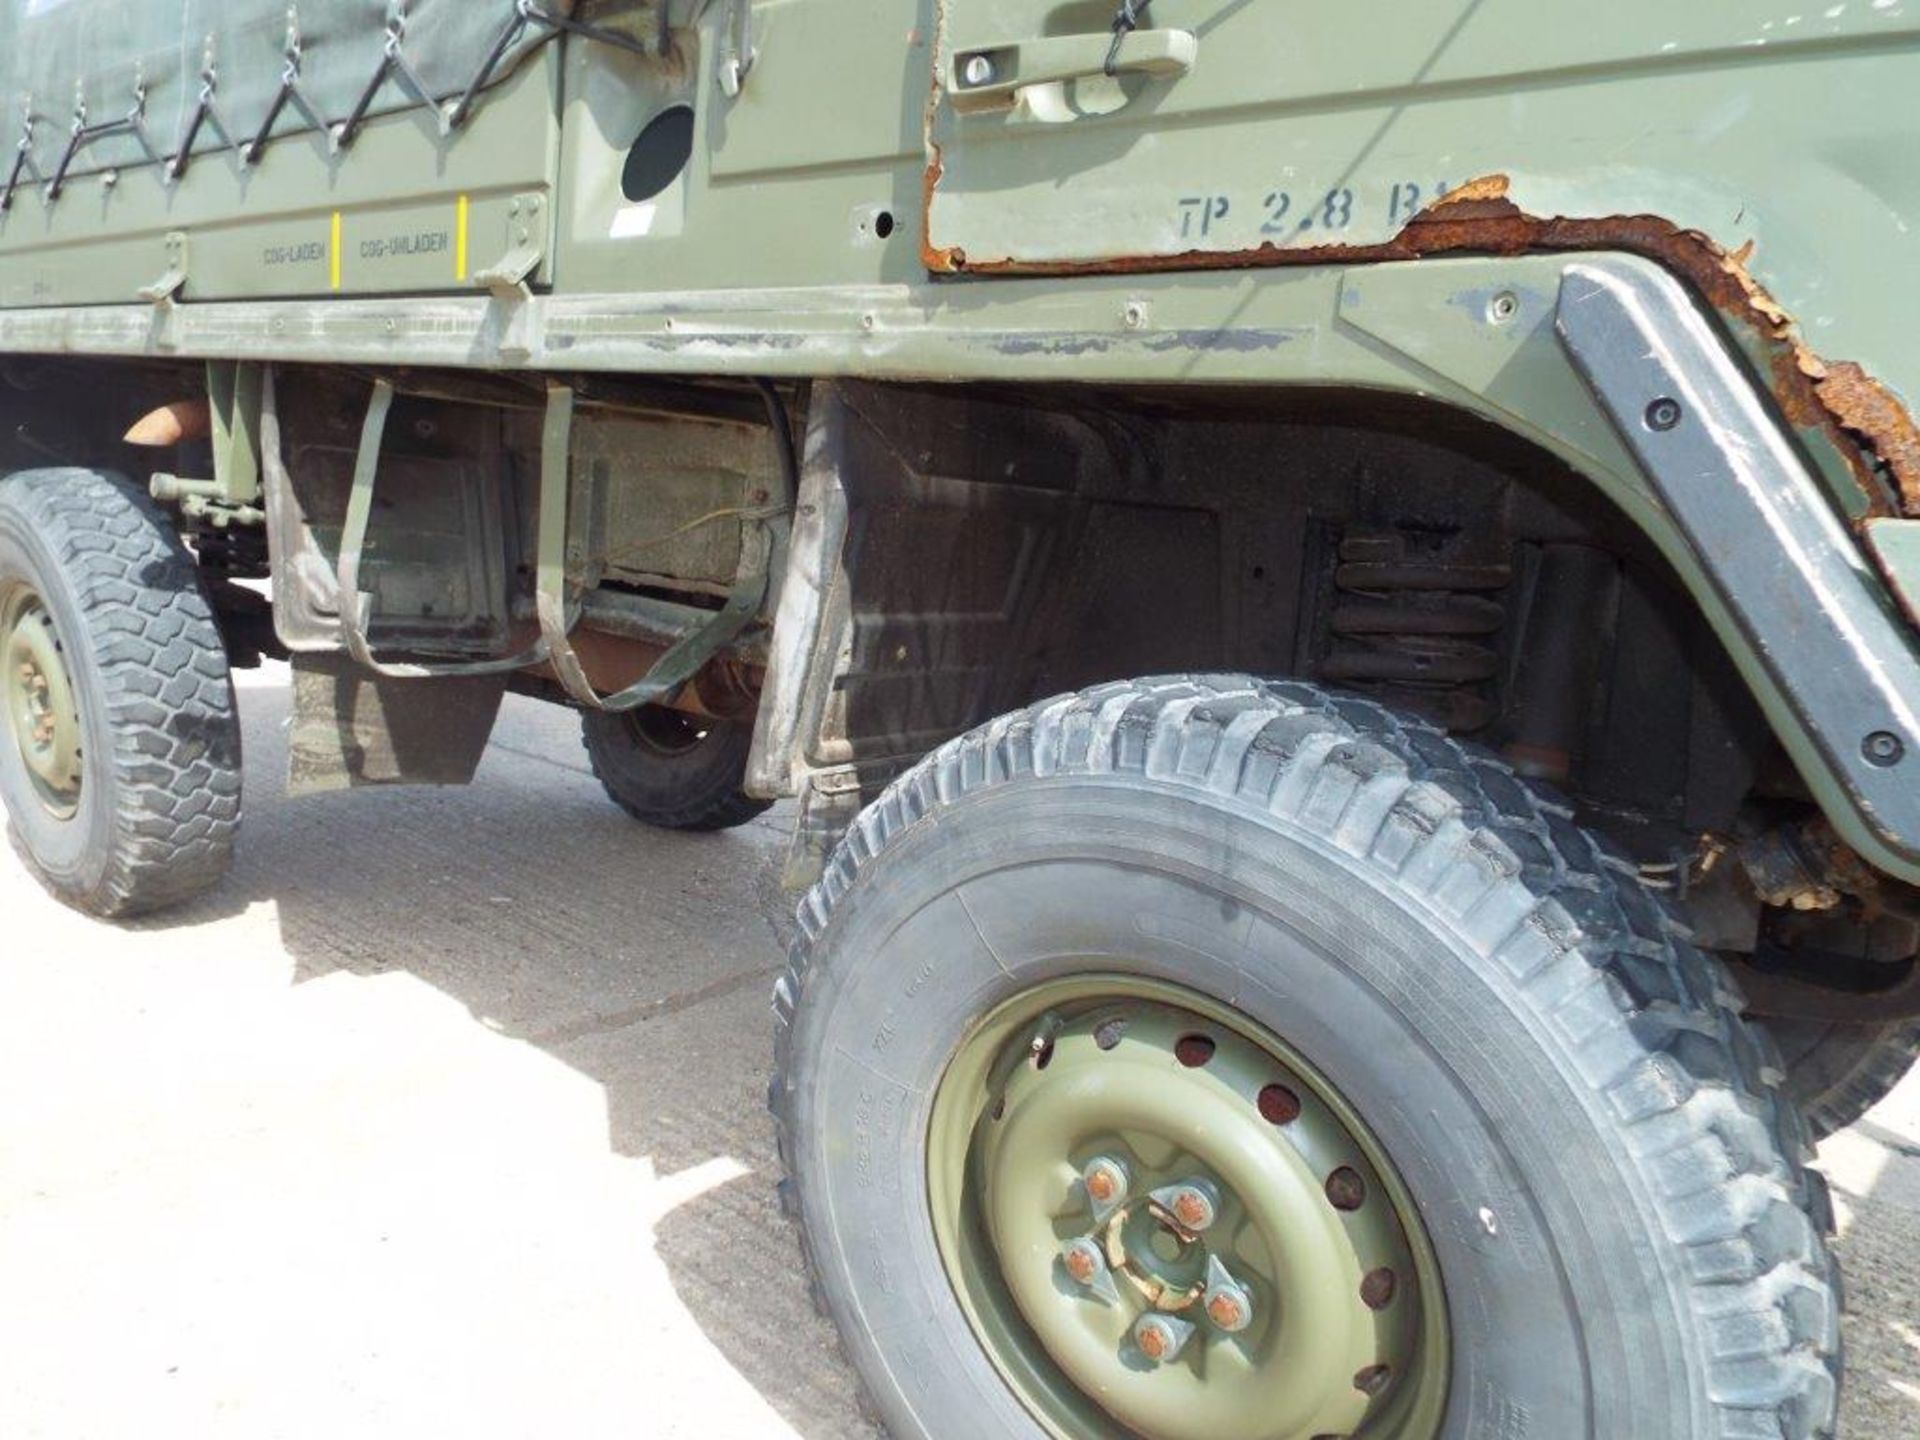 Military Specification Pinzgauer 4X4 Soft Top - Image 12 of 36